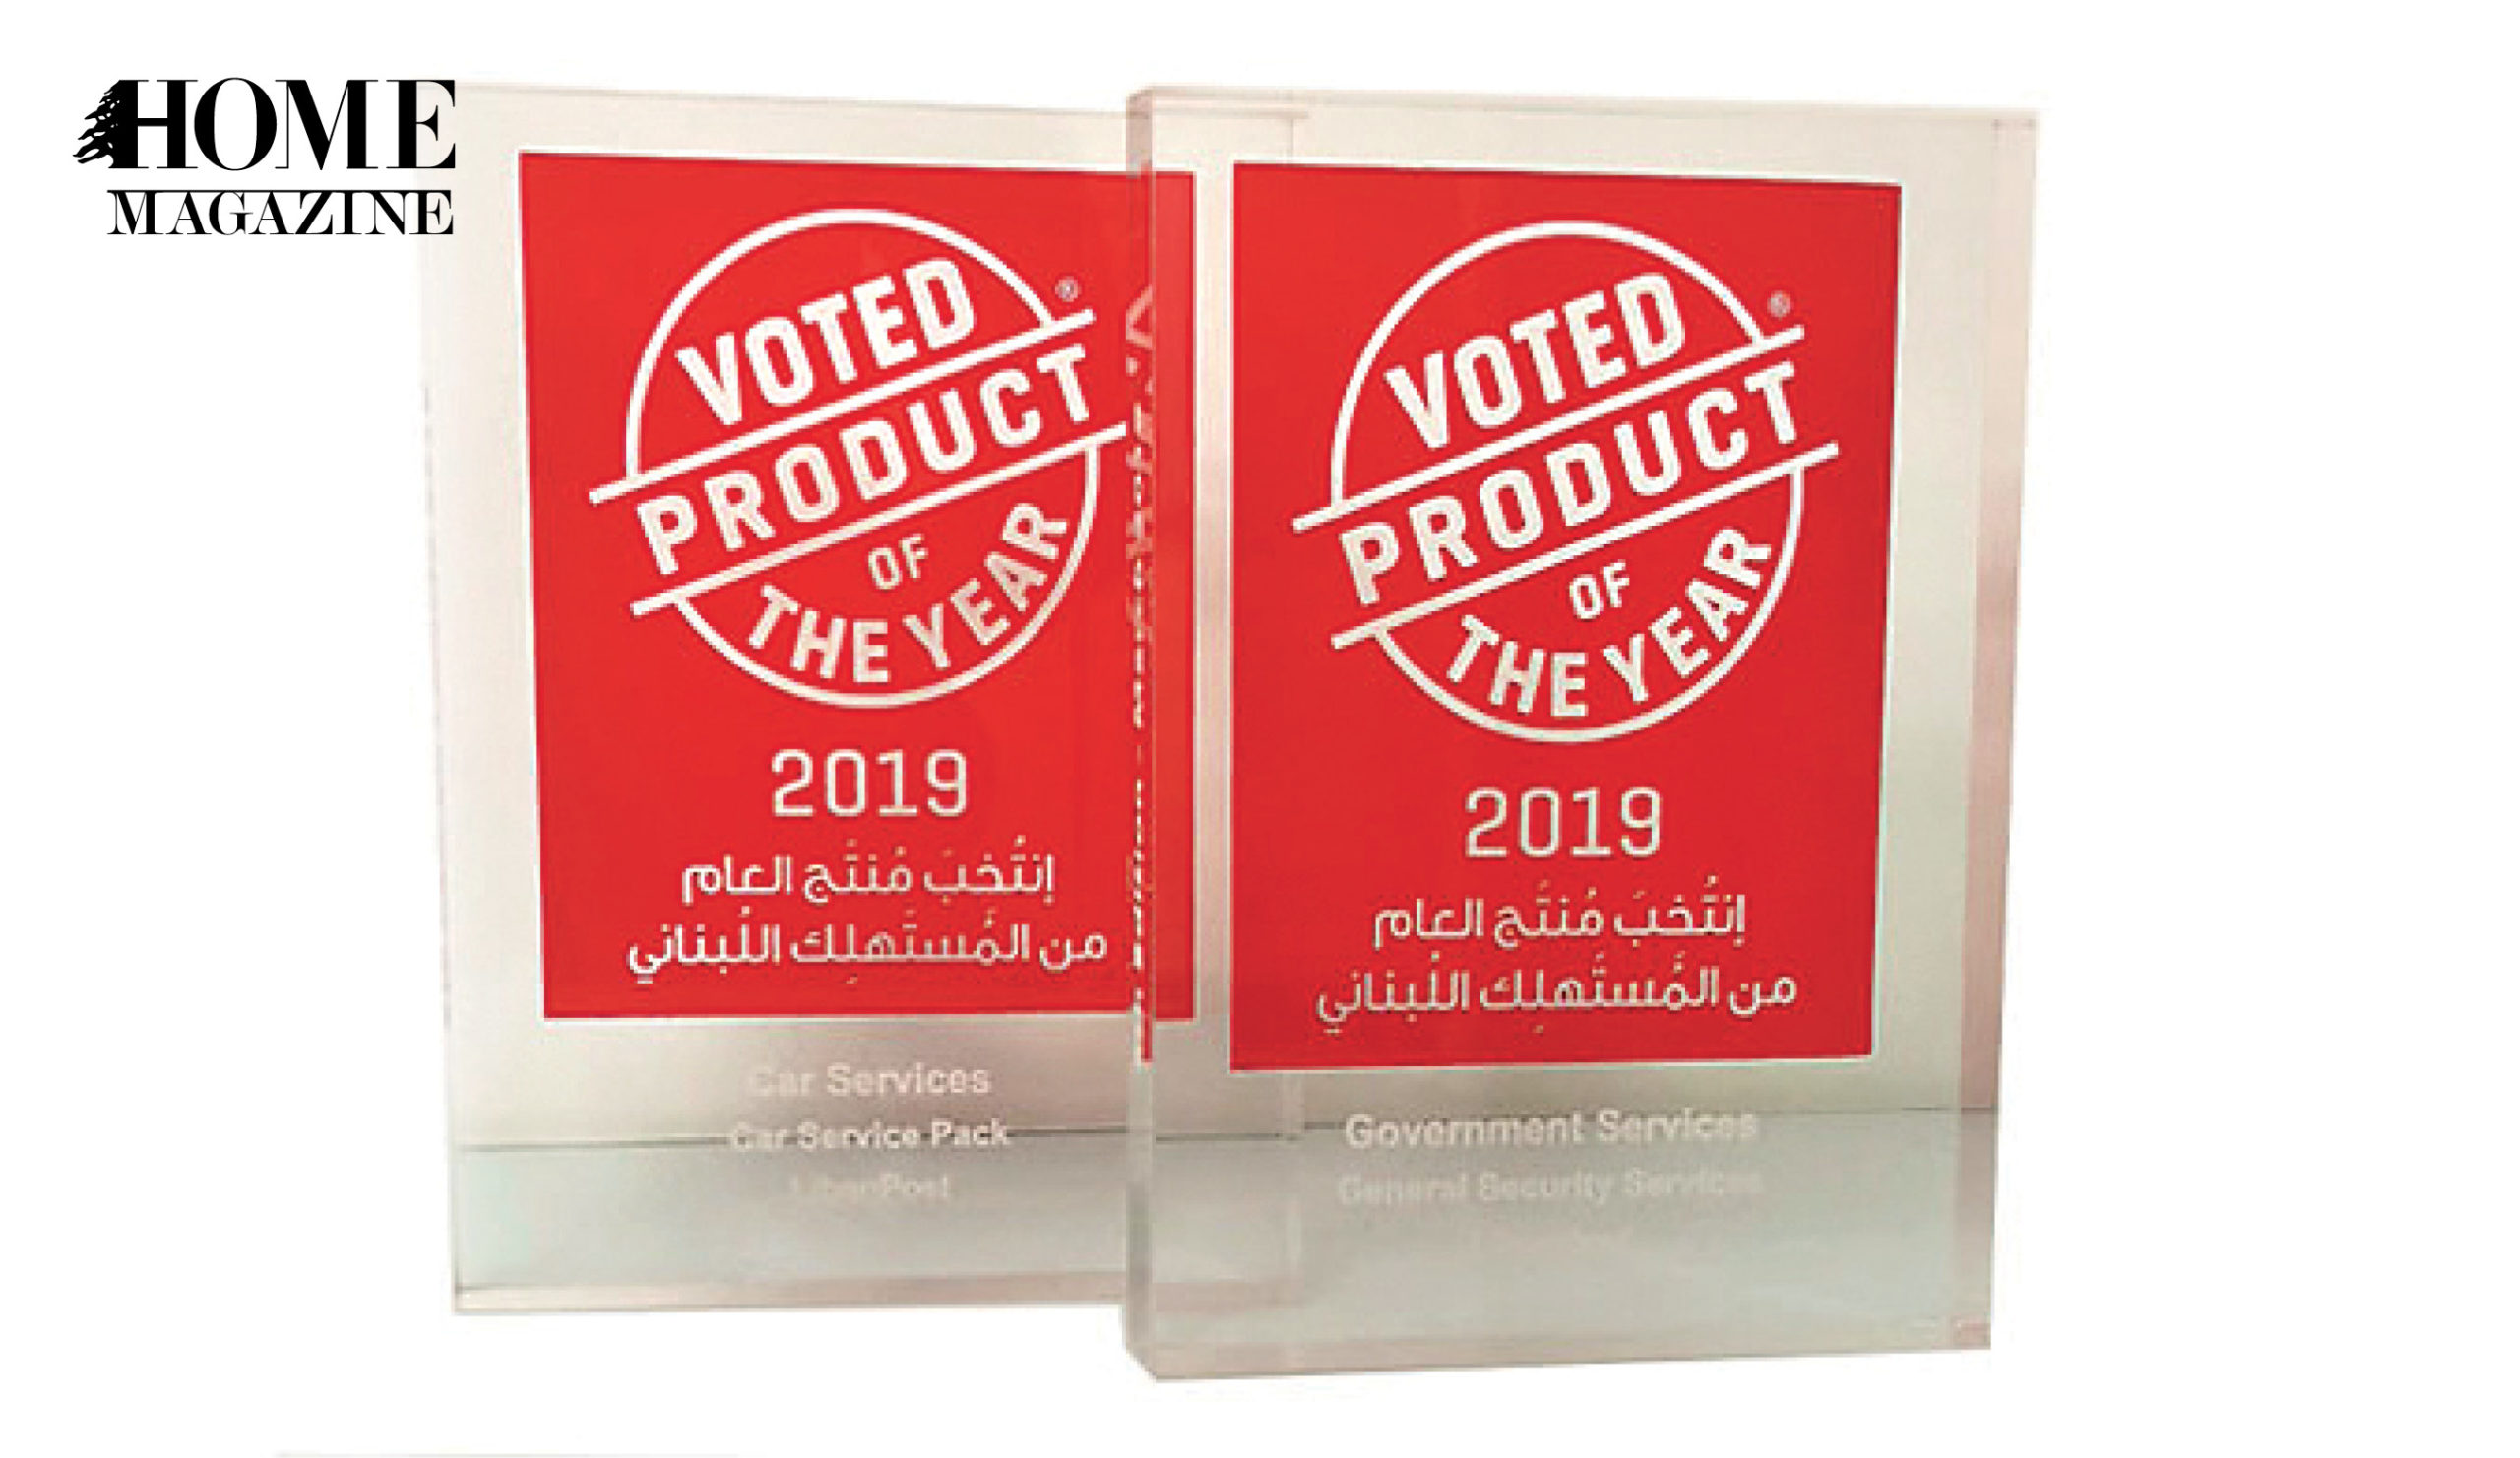 Red trophy with text Voted Product of the Year 2019